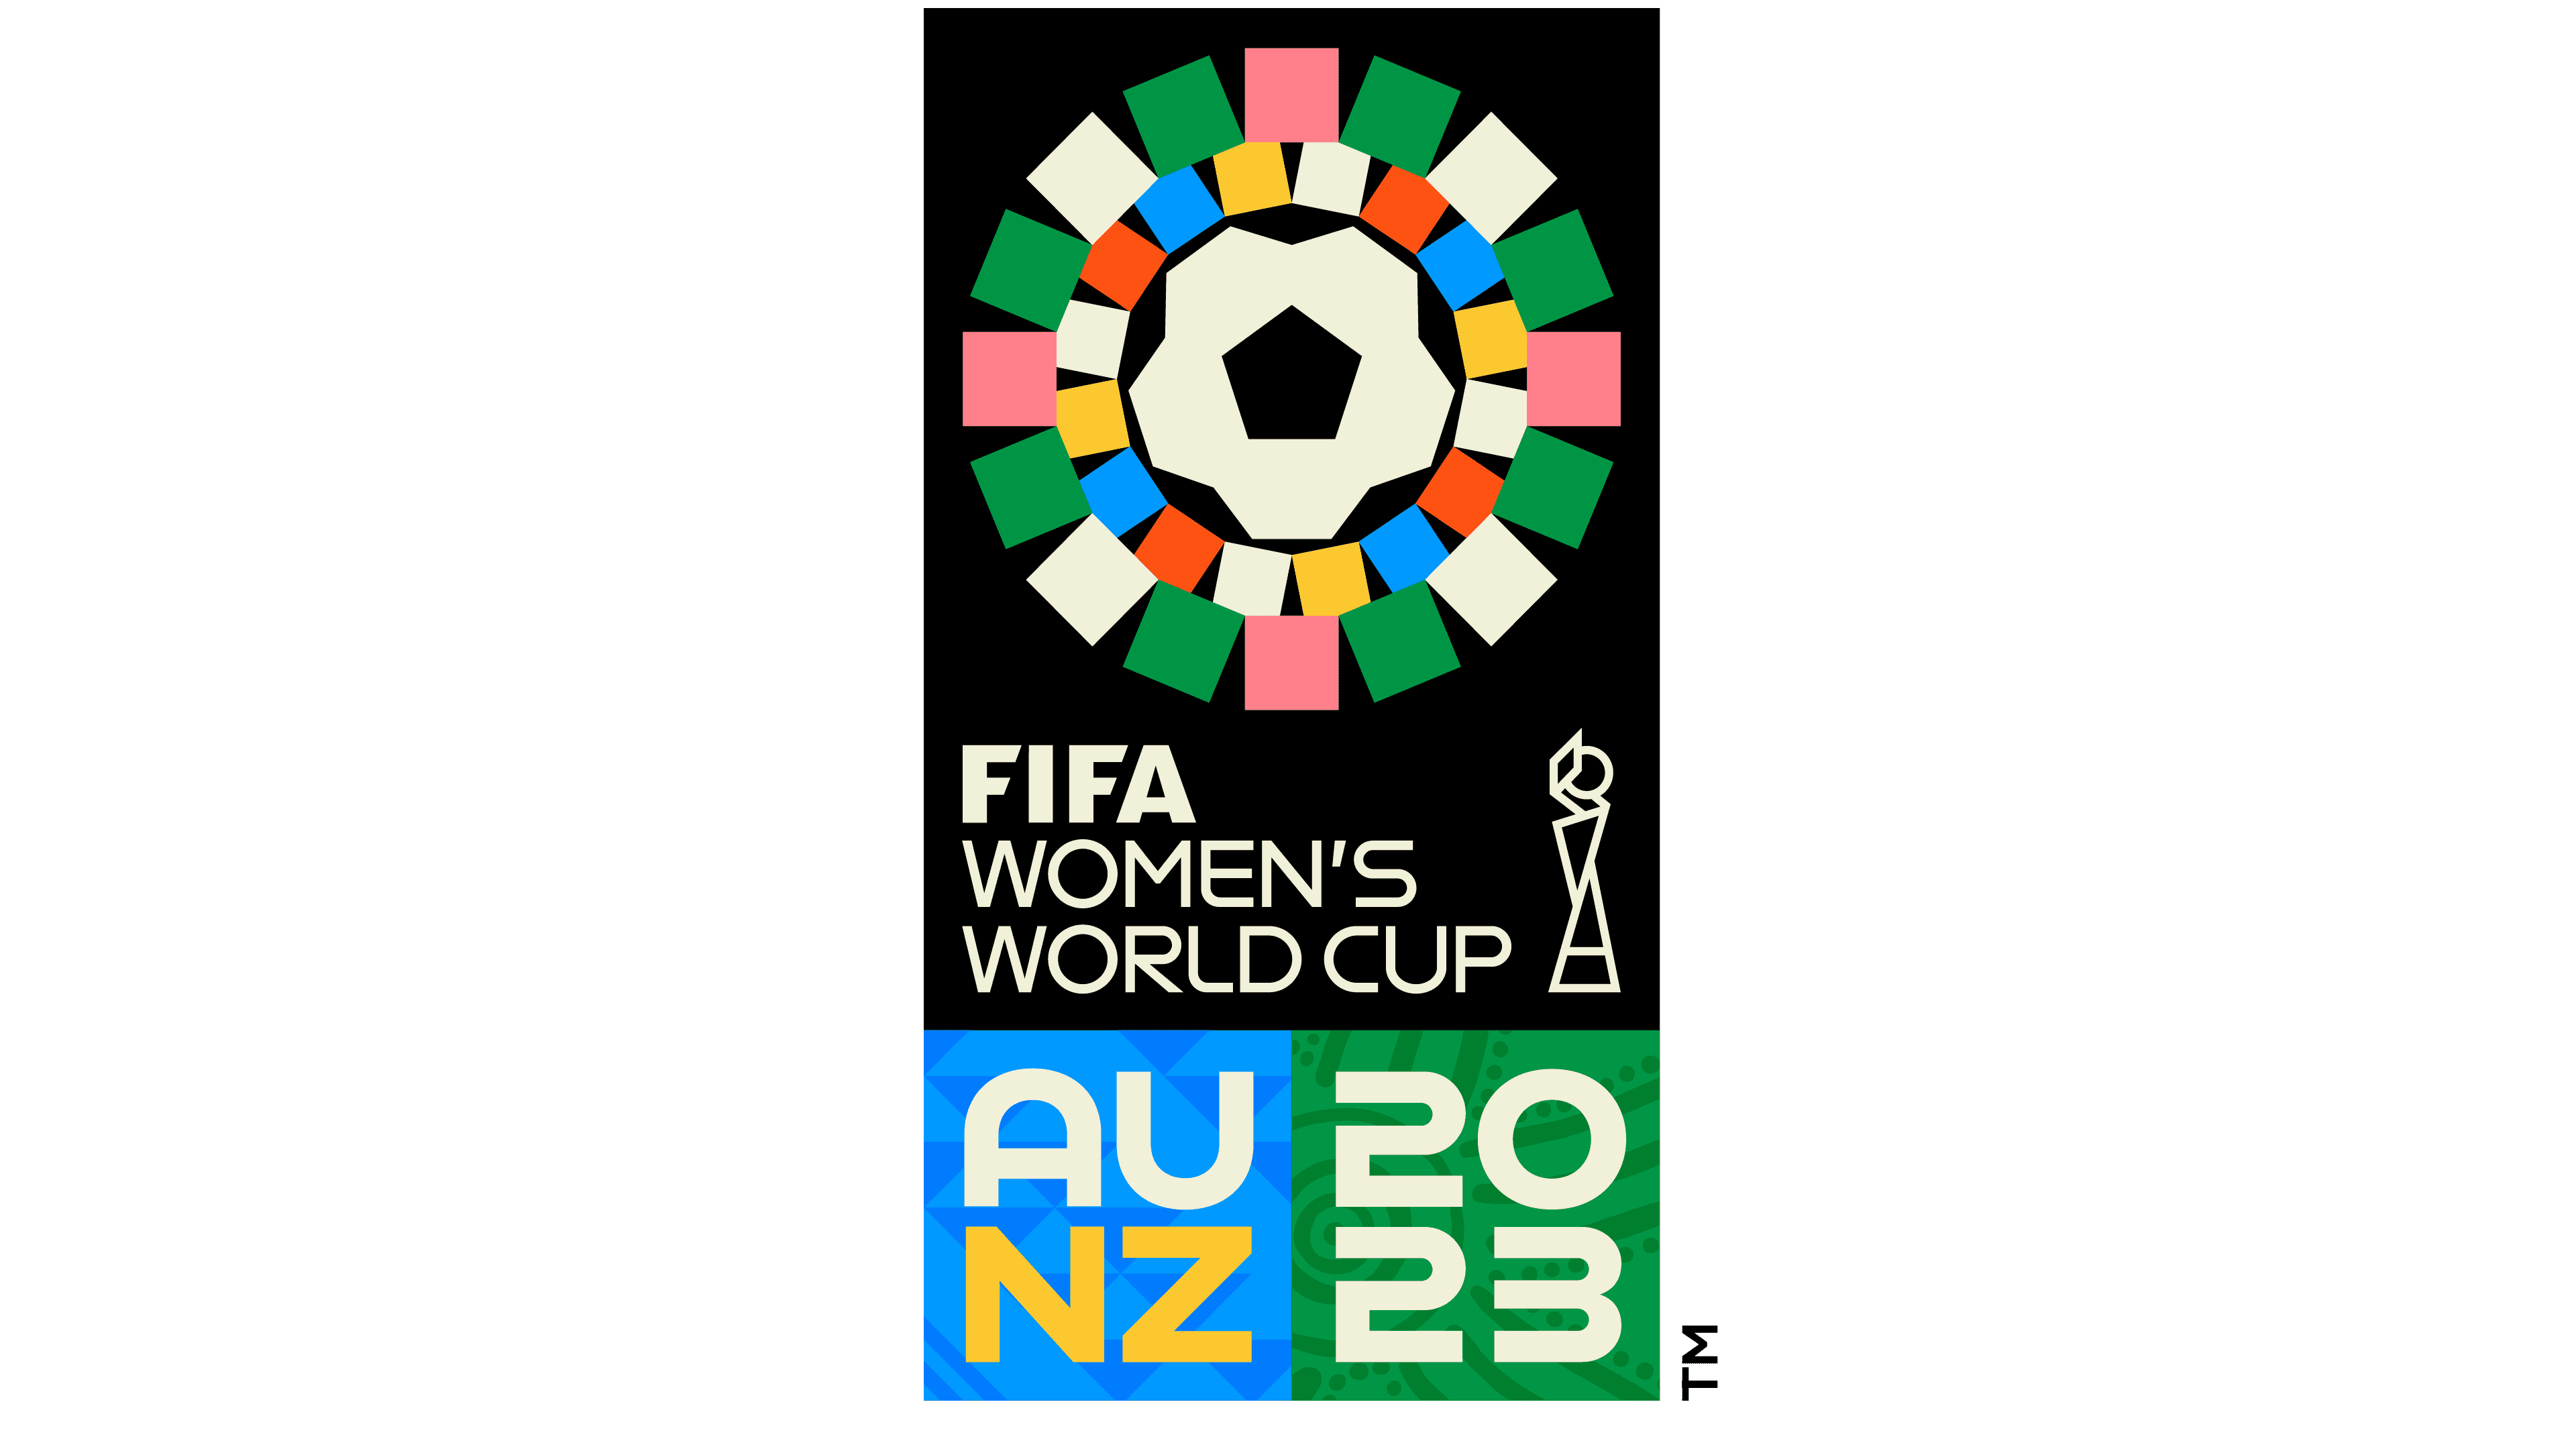 FIFA Women's World Cup Preview - The Asian Game